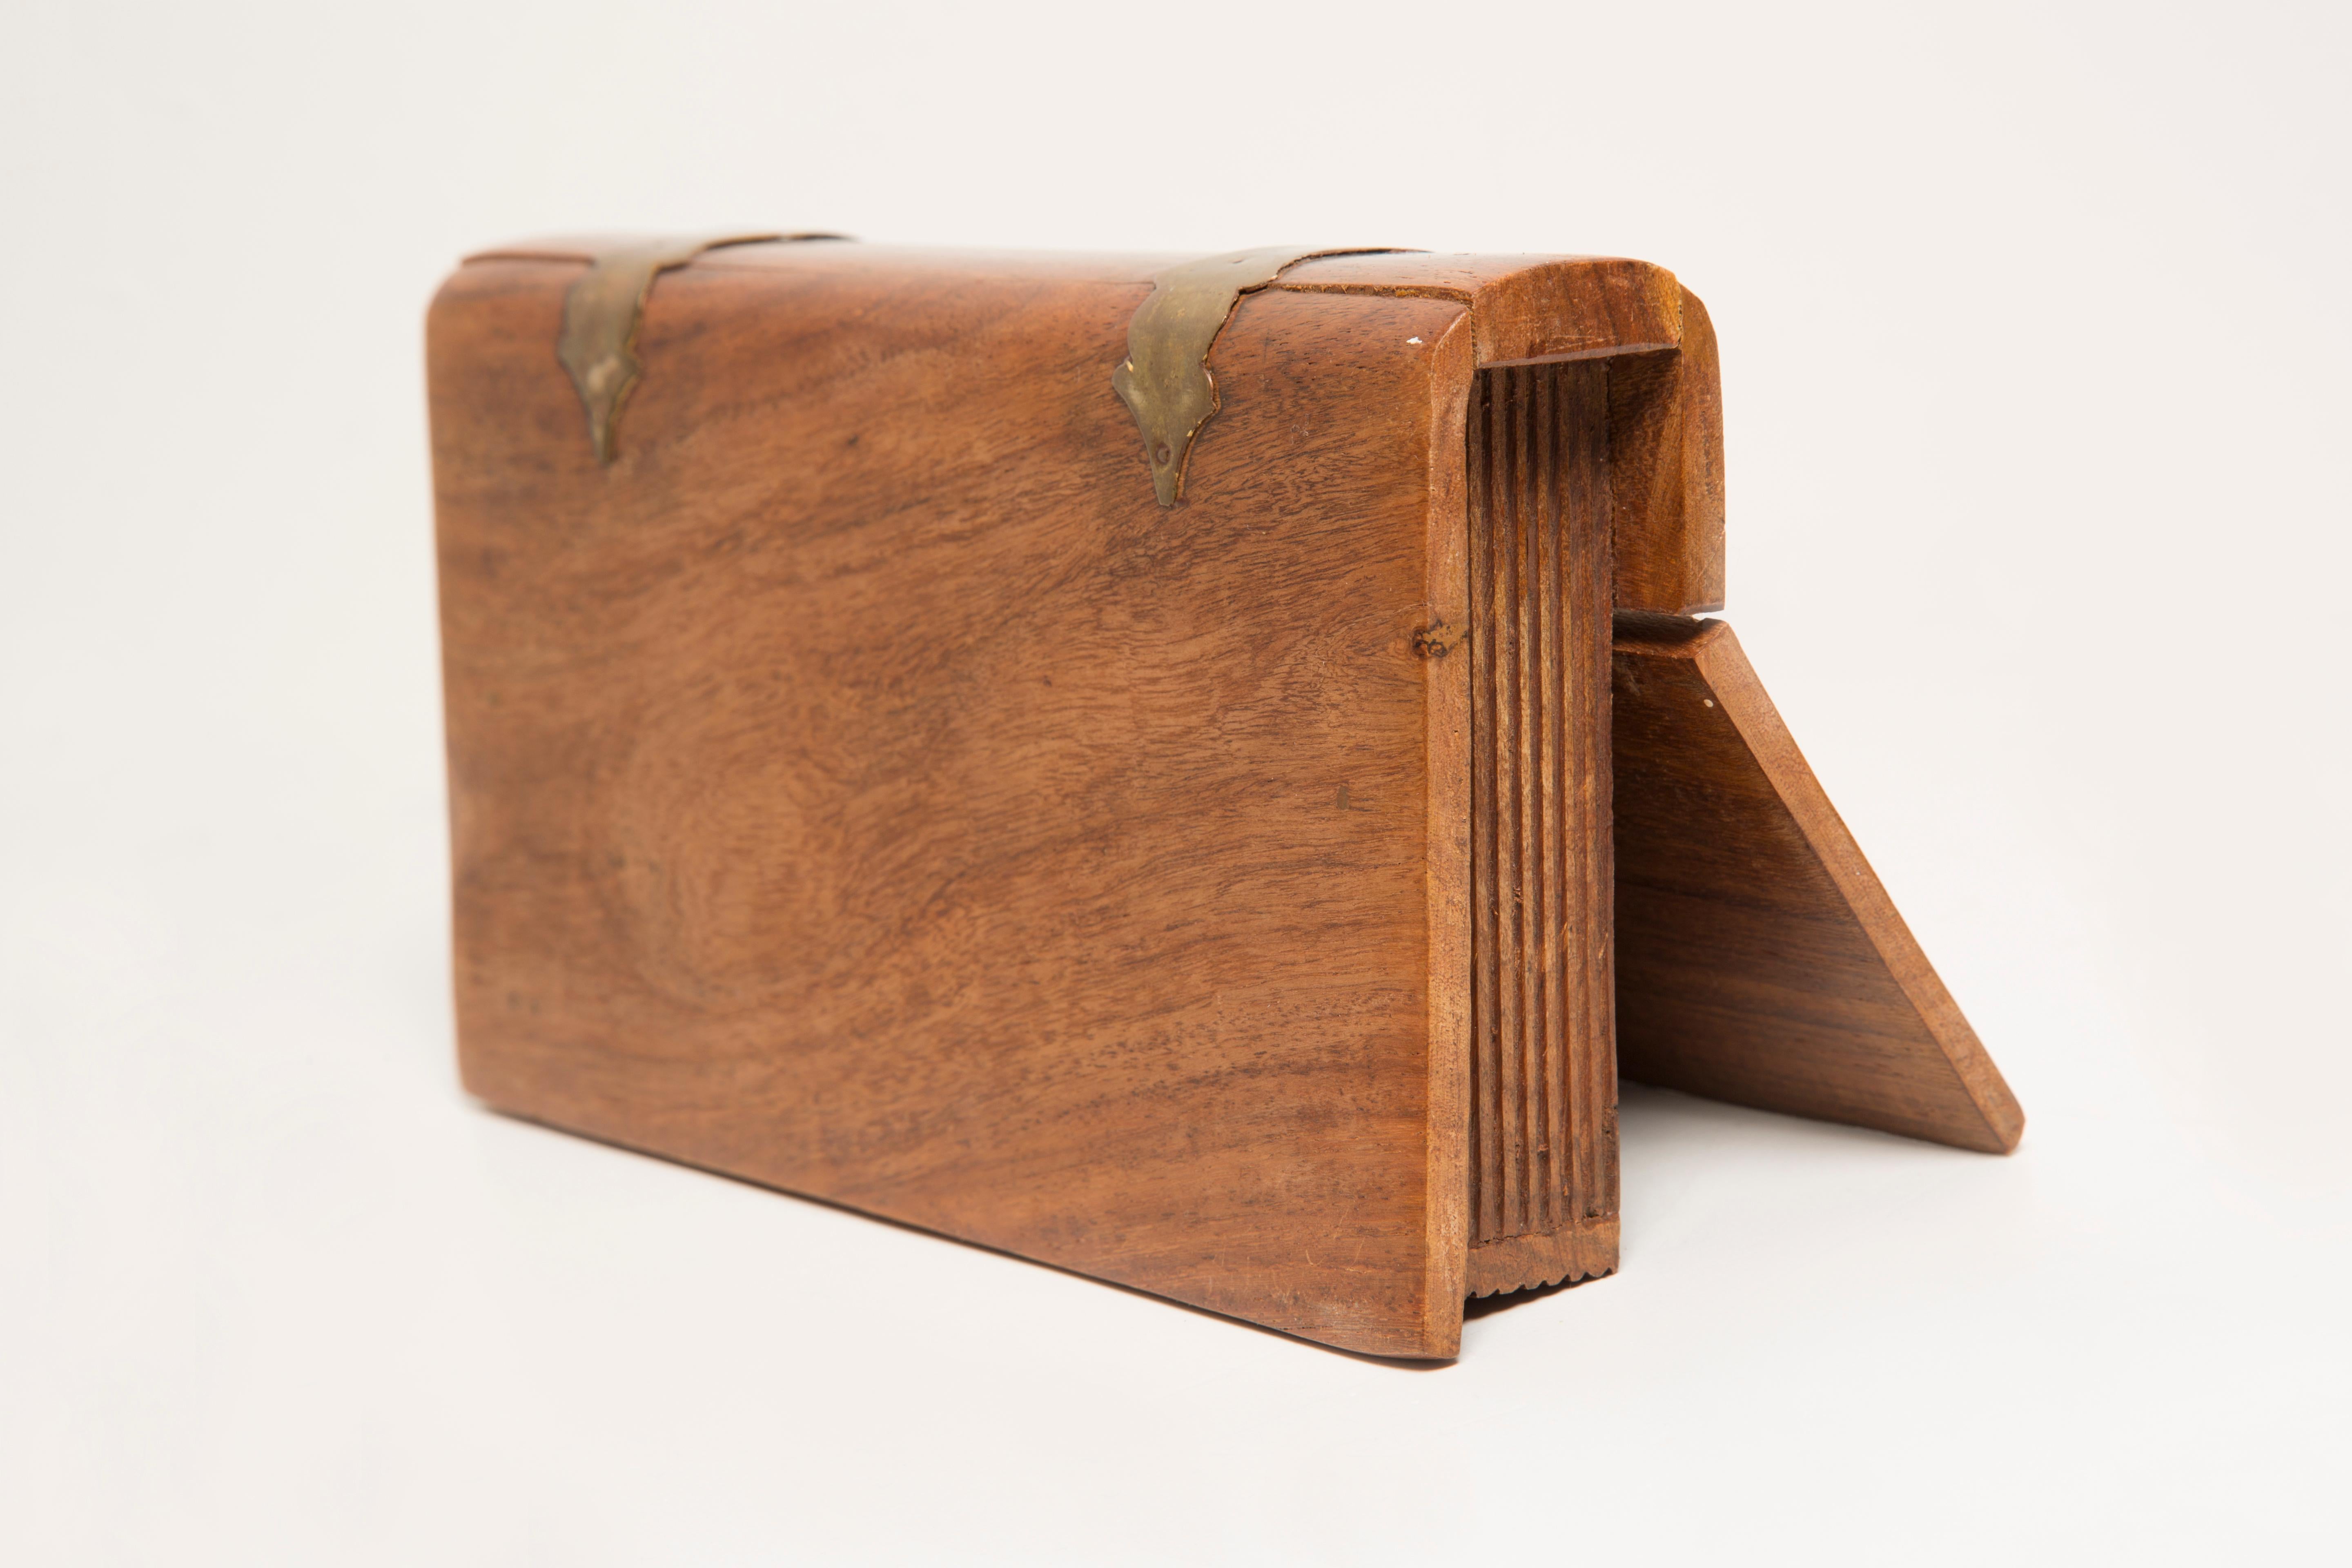 20th Century Midcentury Wood Casket, Cigarette Case, or Jewelry Box, Italy, 1960s For Sale